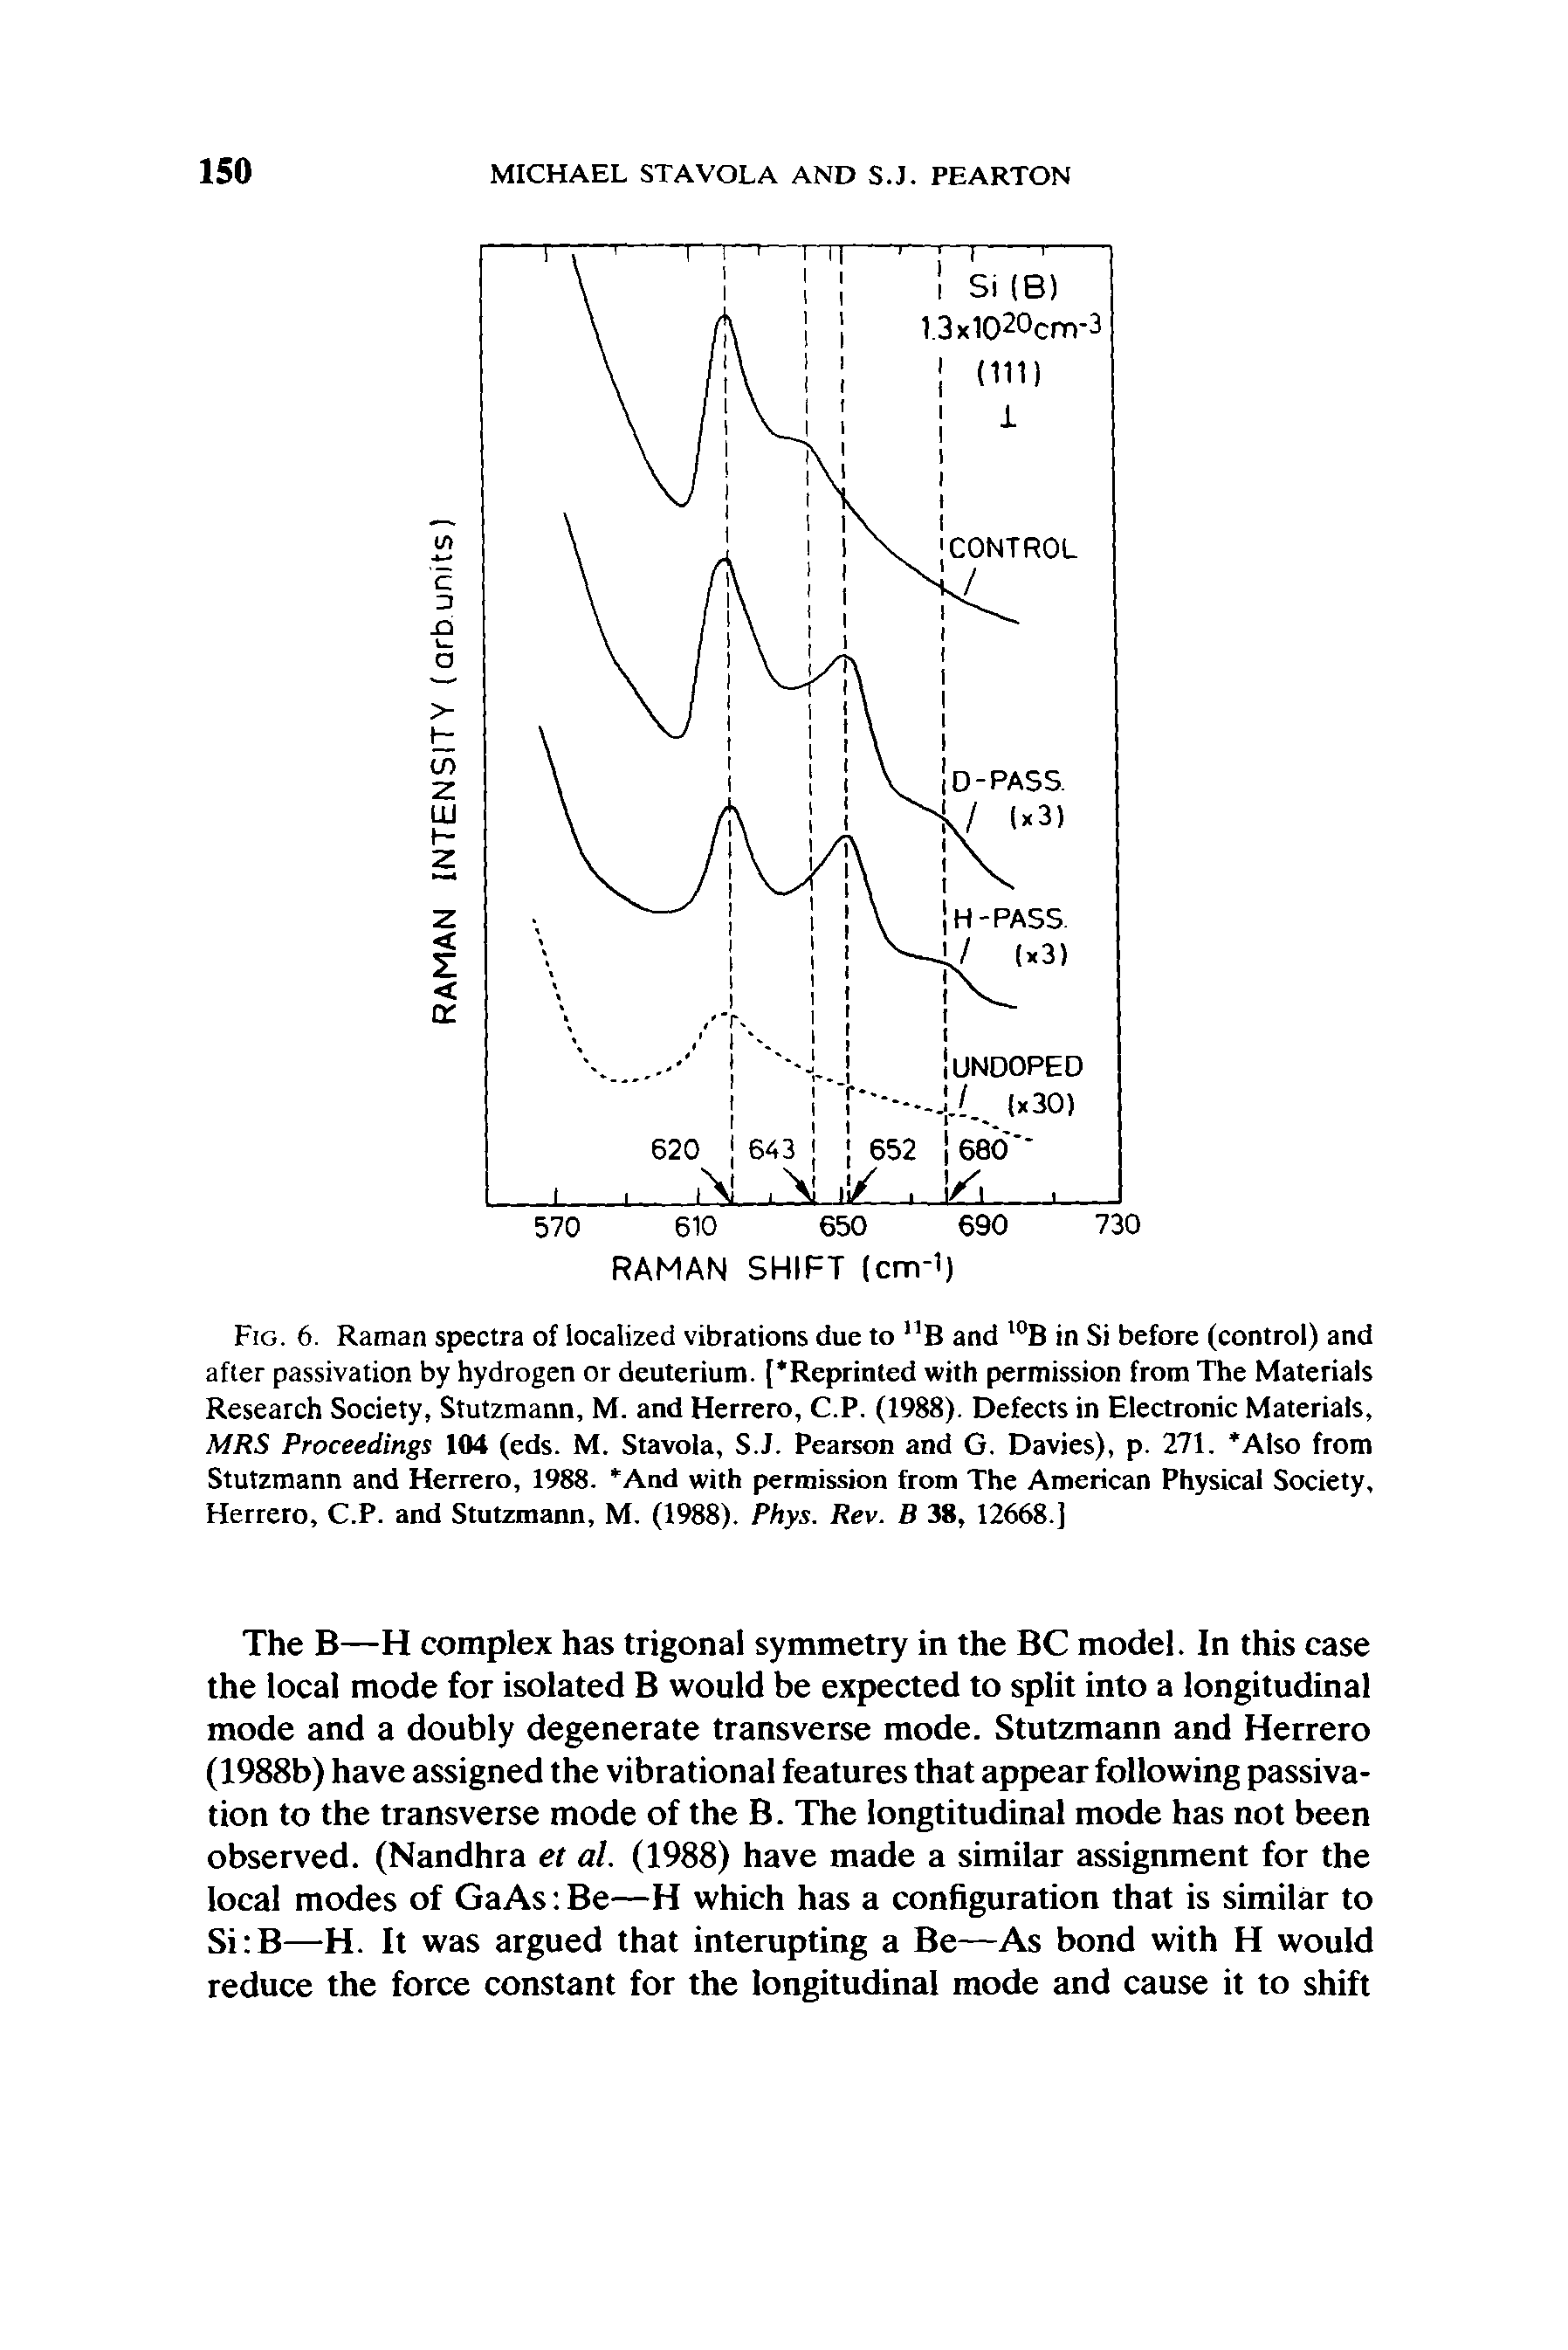 Fig. 6. Raman spectra of localized vibrations due to nB and 10B in Si before (control) and after passivation by hydrogen or deuterium. [ Reprinted with permission from The Materials Research Society, Stutzmann, M. and Herrero, C.P. (1988). Defects in Electronic Materials, MRS Proceedings 104 (eds. M. Stavola, S.J. Pearson and G. Davies), p. 271. Also from Stutzmann and Herrero, 1988. And with permission from The American Physical Society, Herrero, C.P. and Stutzmann, M. (1988). Phys. Rev. B 38, 12668.]...